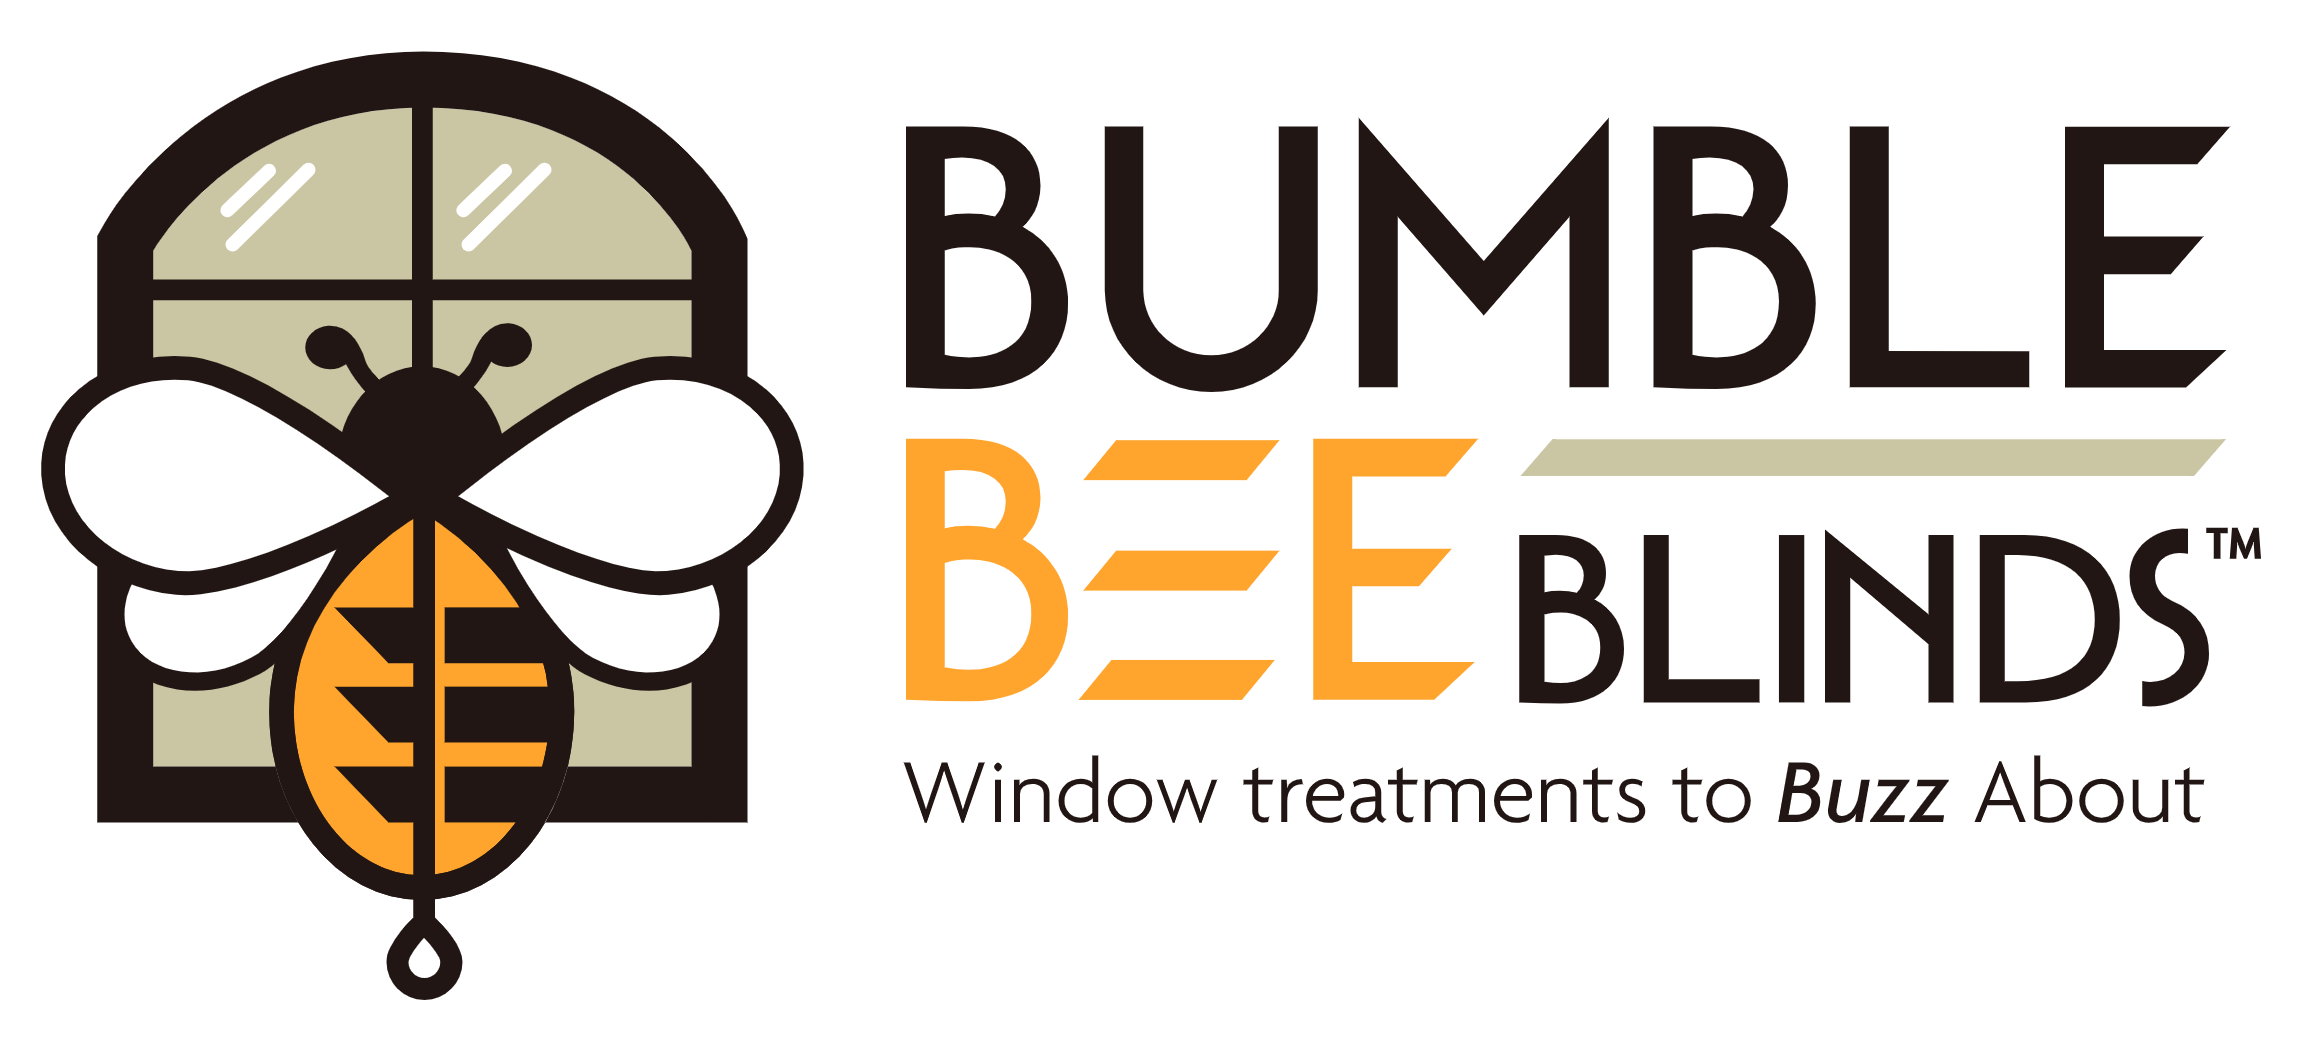 Bumble Bee Blinds of South Austin Logo